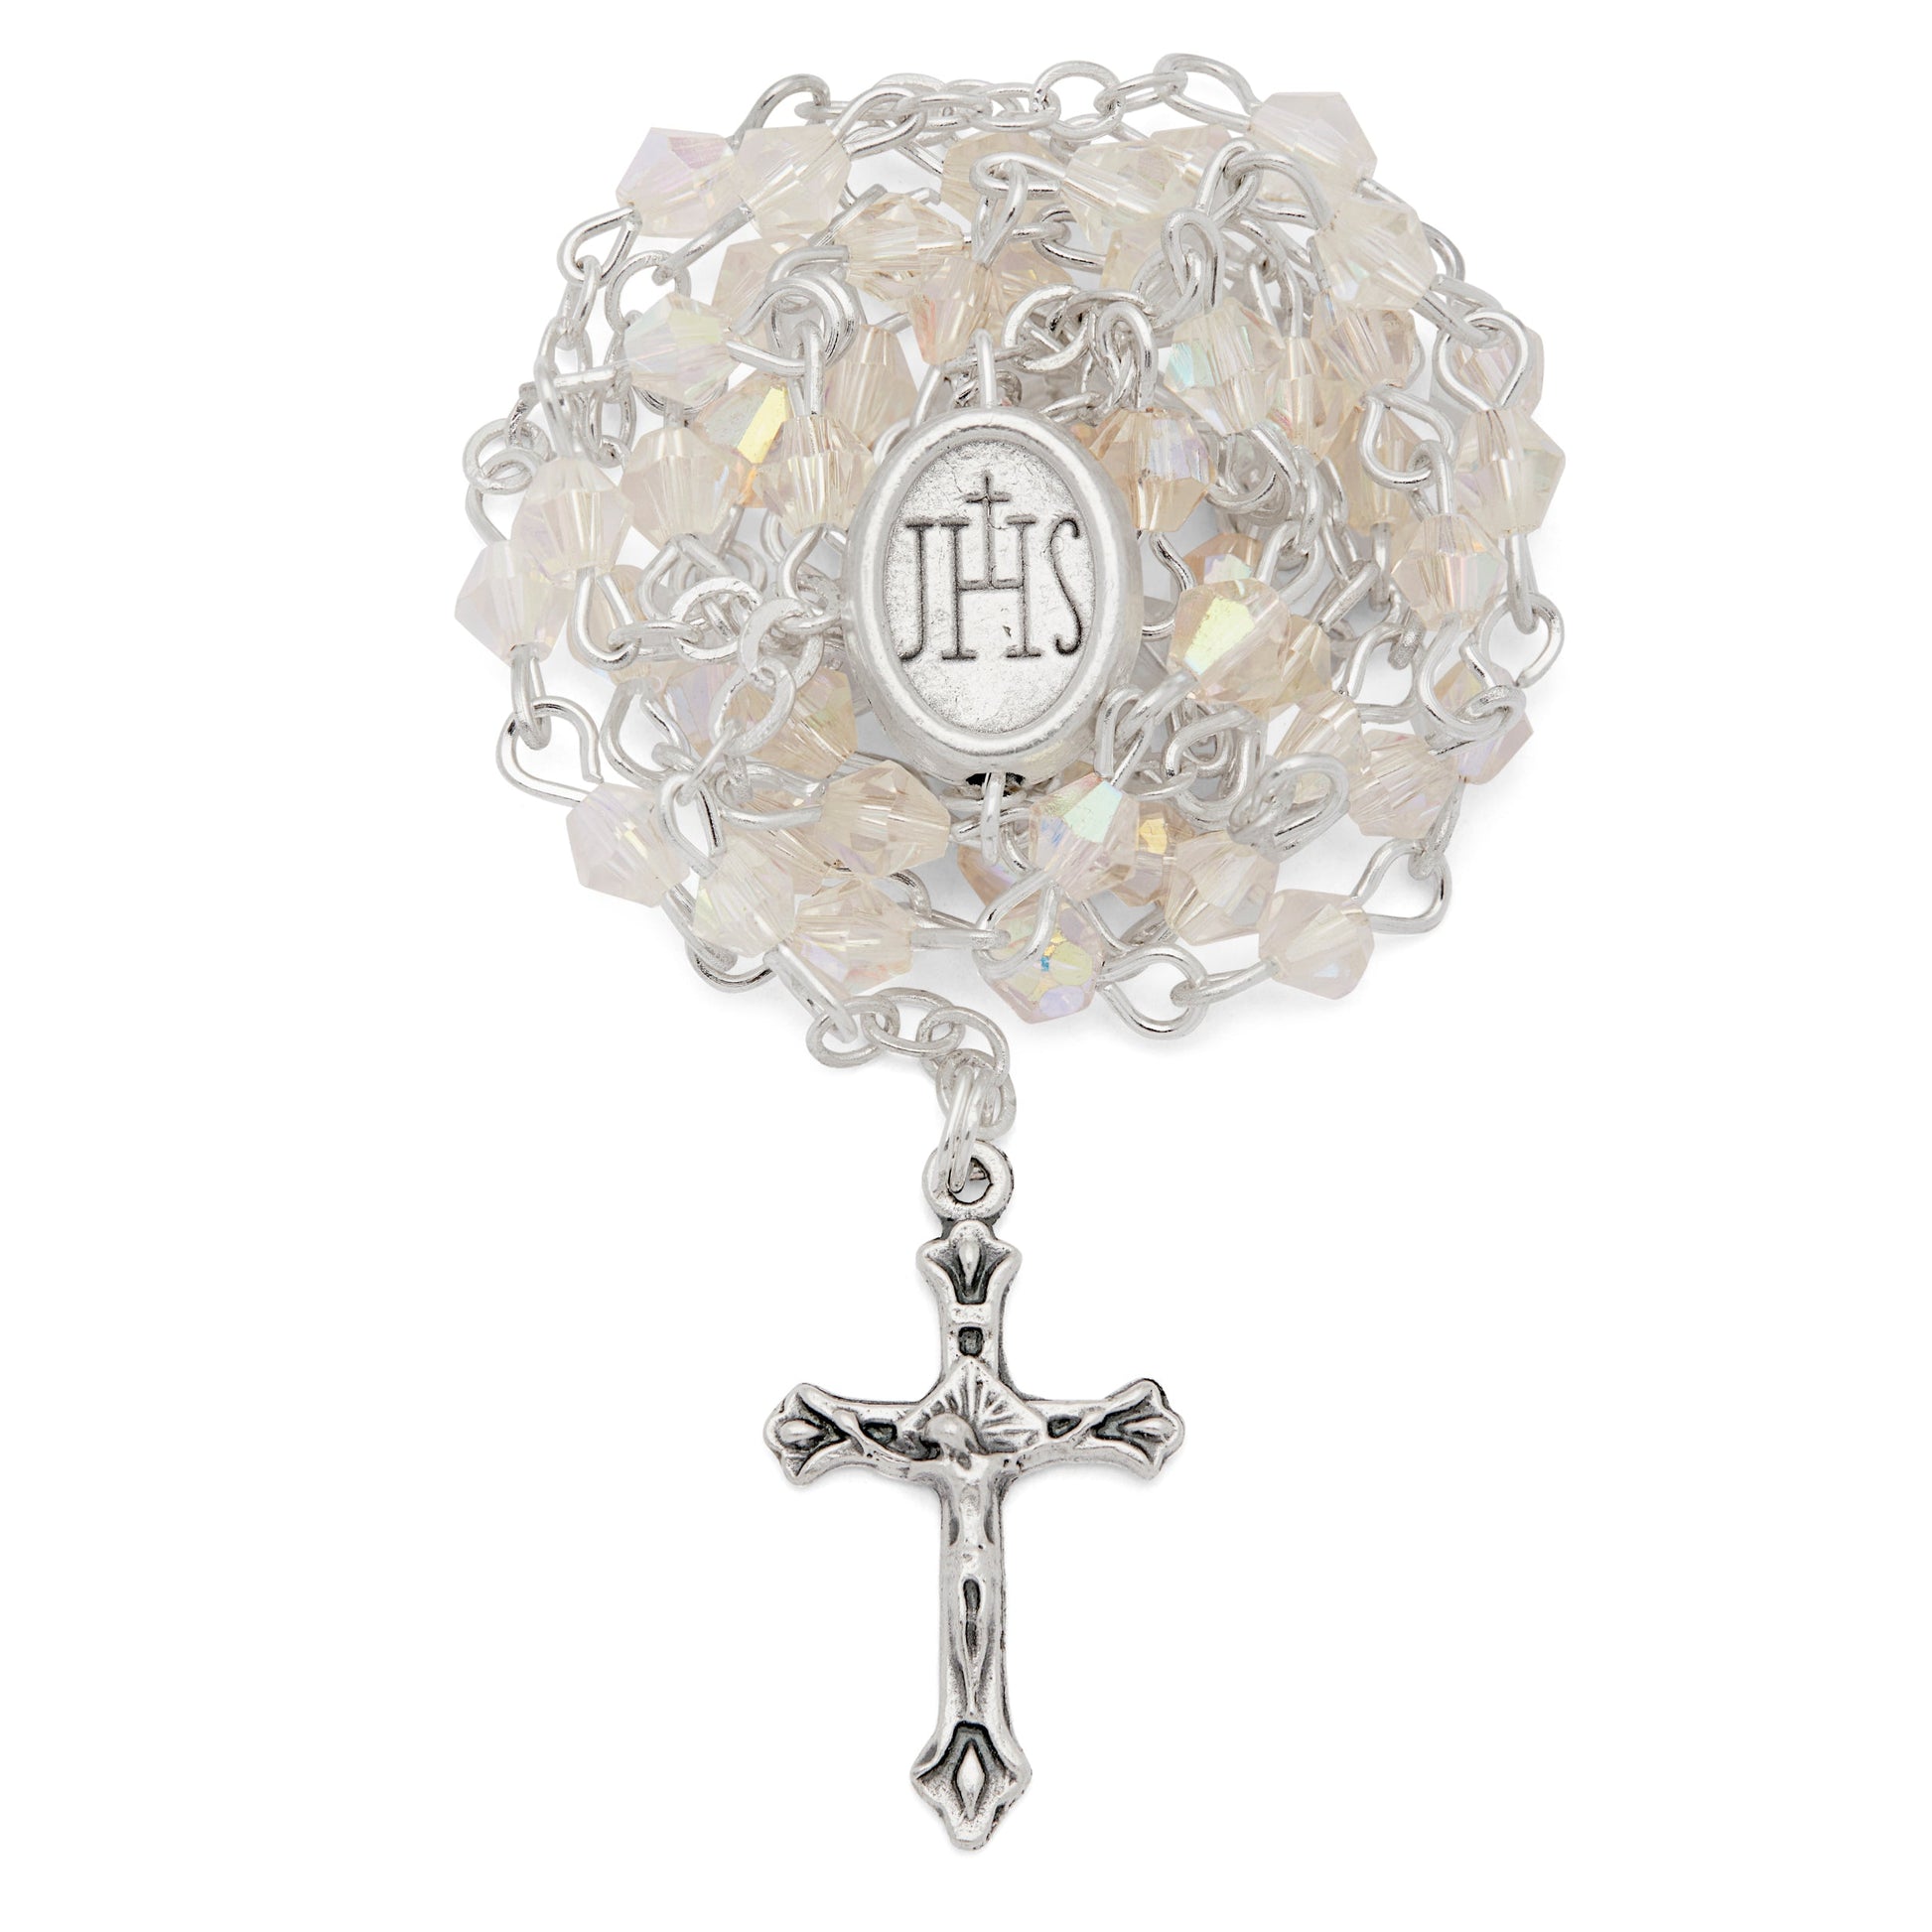 Mondo Cattolico Rosary Box 3.5x4 cm (1.38x1.57 in) / 3 mm (0.12 in) / 37.5 cm (14.76 in) Small White Enameled First Communion Rosary Case With White Crystal Rosary